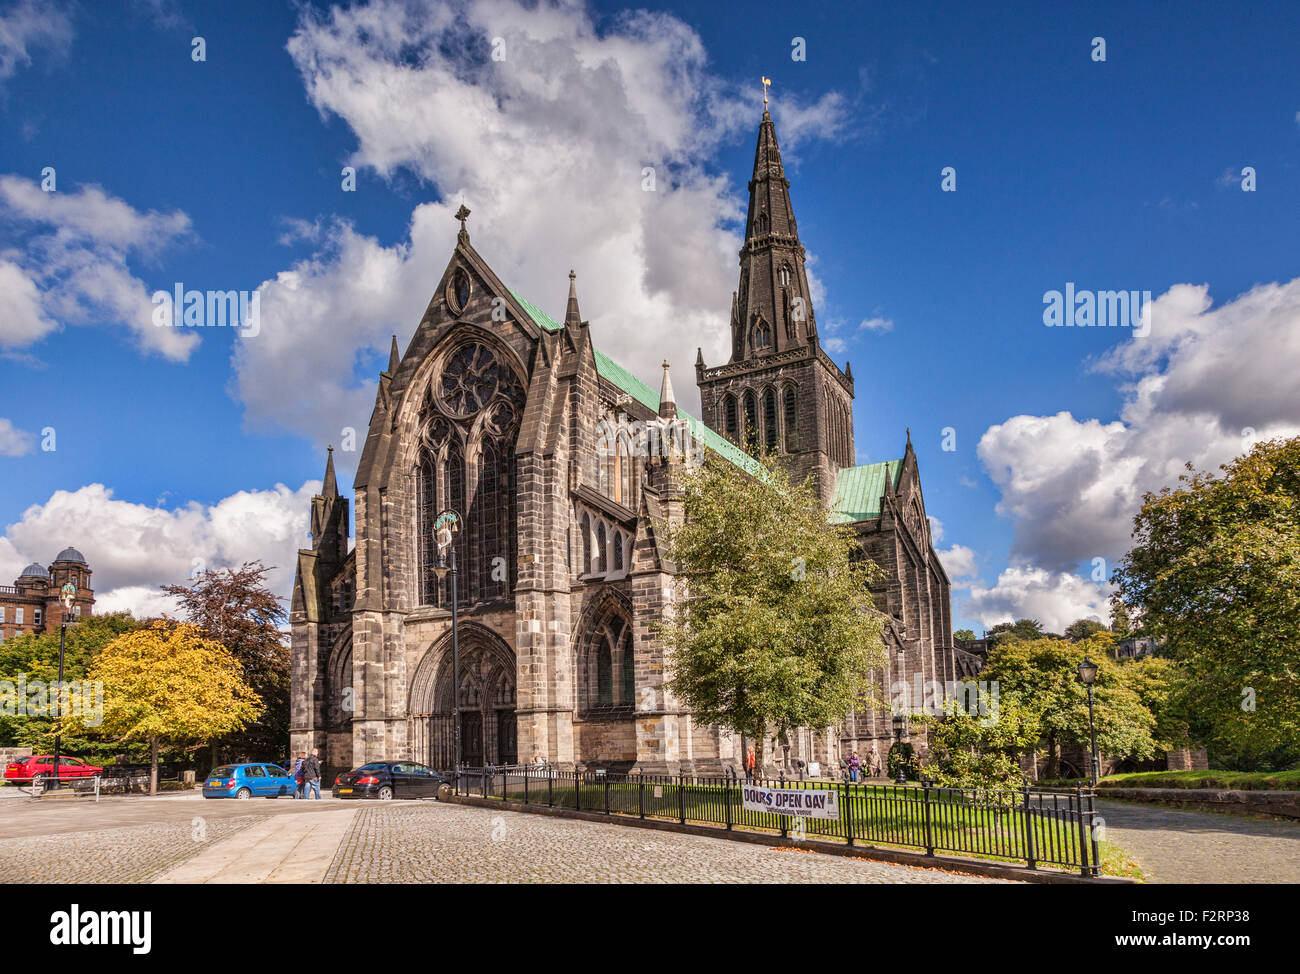 Glasgow Cathedral, also called the High Kirk of Glasgow or St Kentigern's or St Mungo's Cathedral, Glasgow, Scotland,UK. Stock Photo